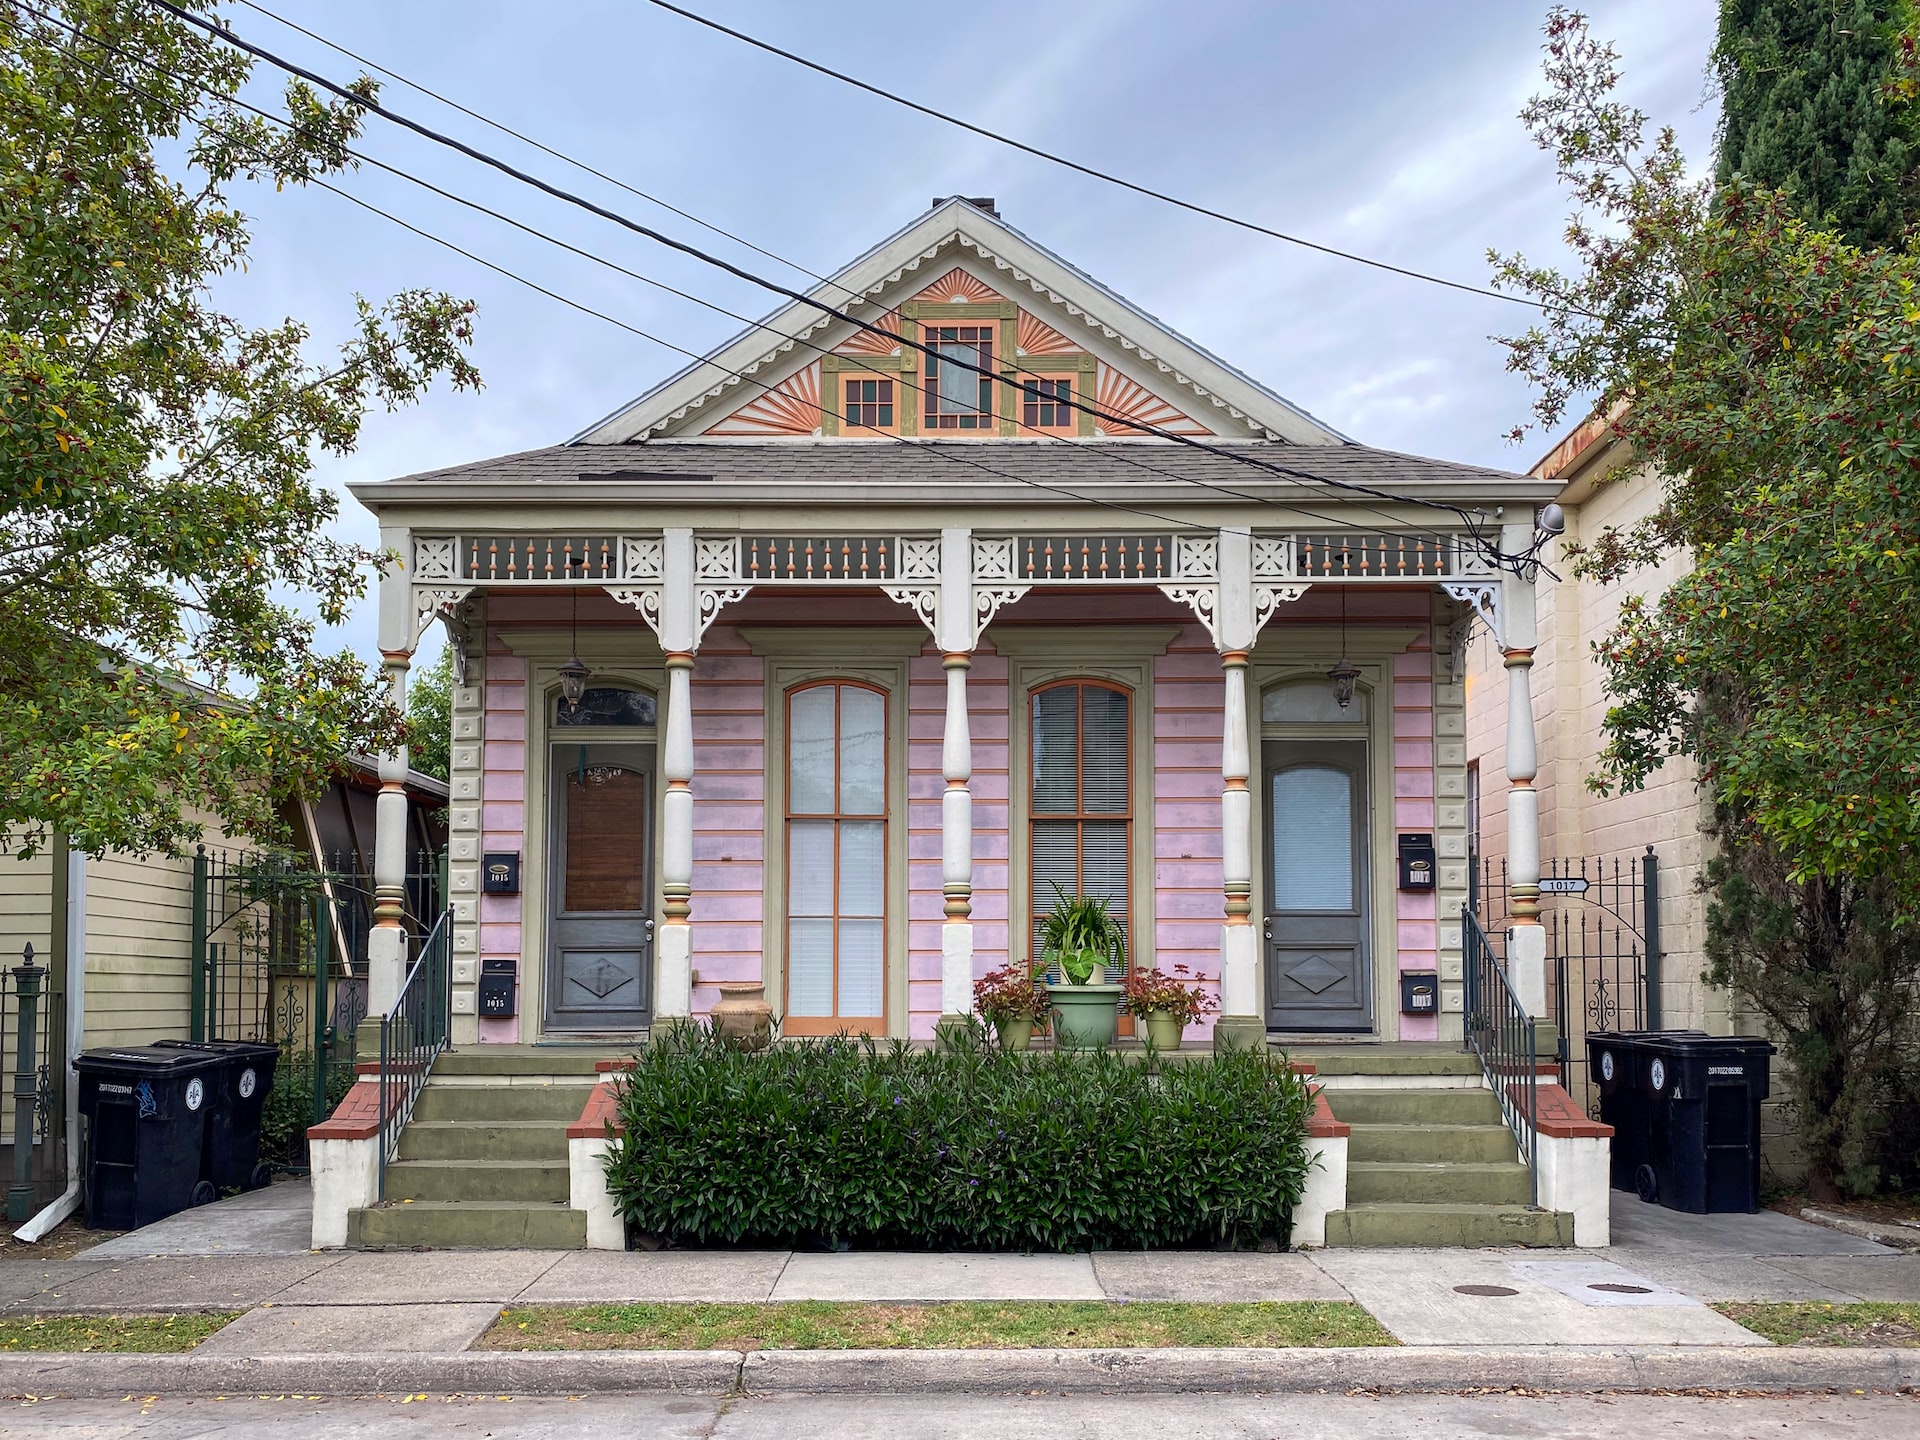 Small pink townhouse in New Orleans.